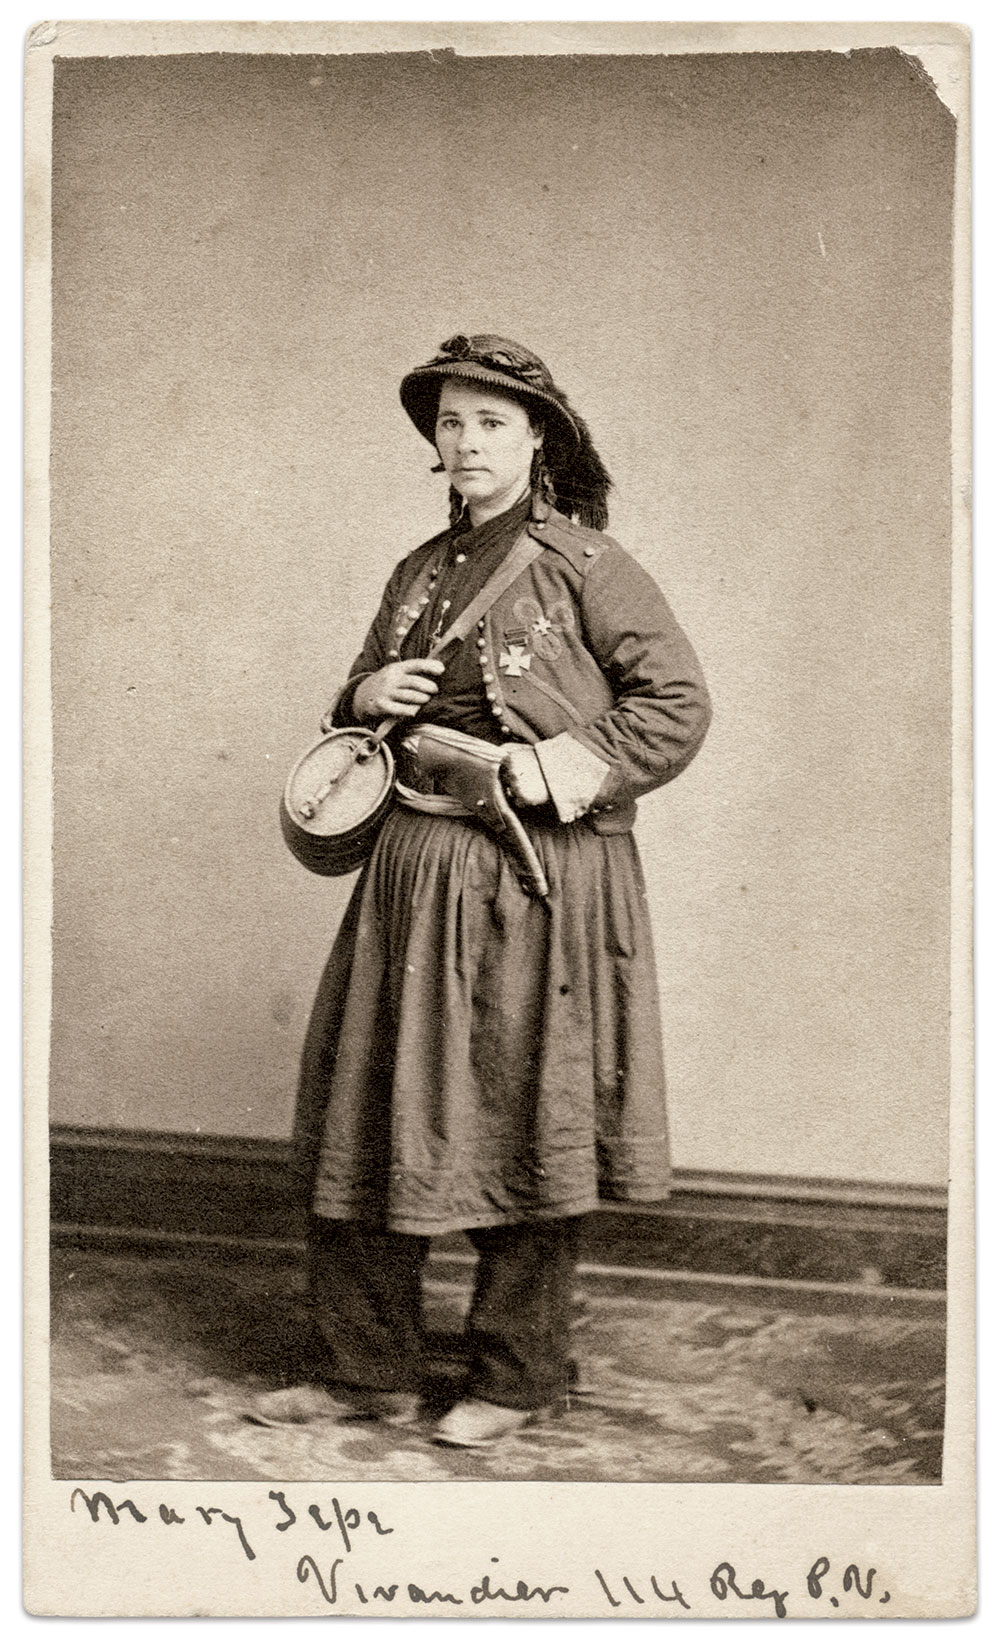 Marie stands proud in her trademark Zouave-inspired outfit, holding her iconic keg, pistol on her hip at the ready. She wears the Kearny Cross, awarded to her for bravery at the Battle of Chancellorsville. Carte de visite by Robert W. Addis of Washington, D.C. The Liljenquist Family Collection at the Library of Congress.